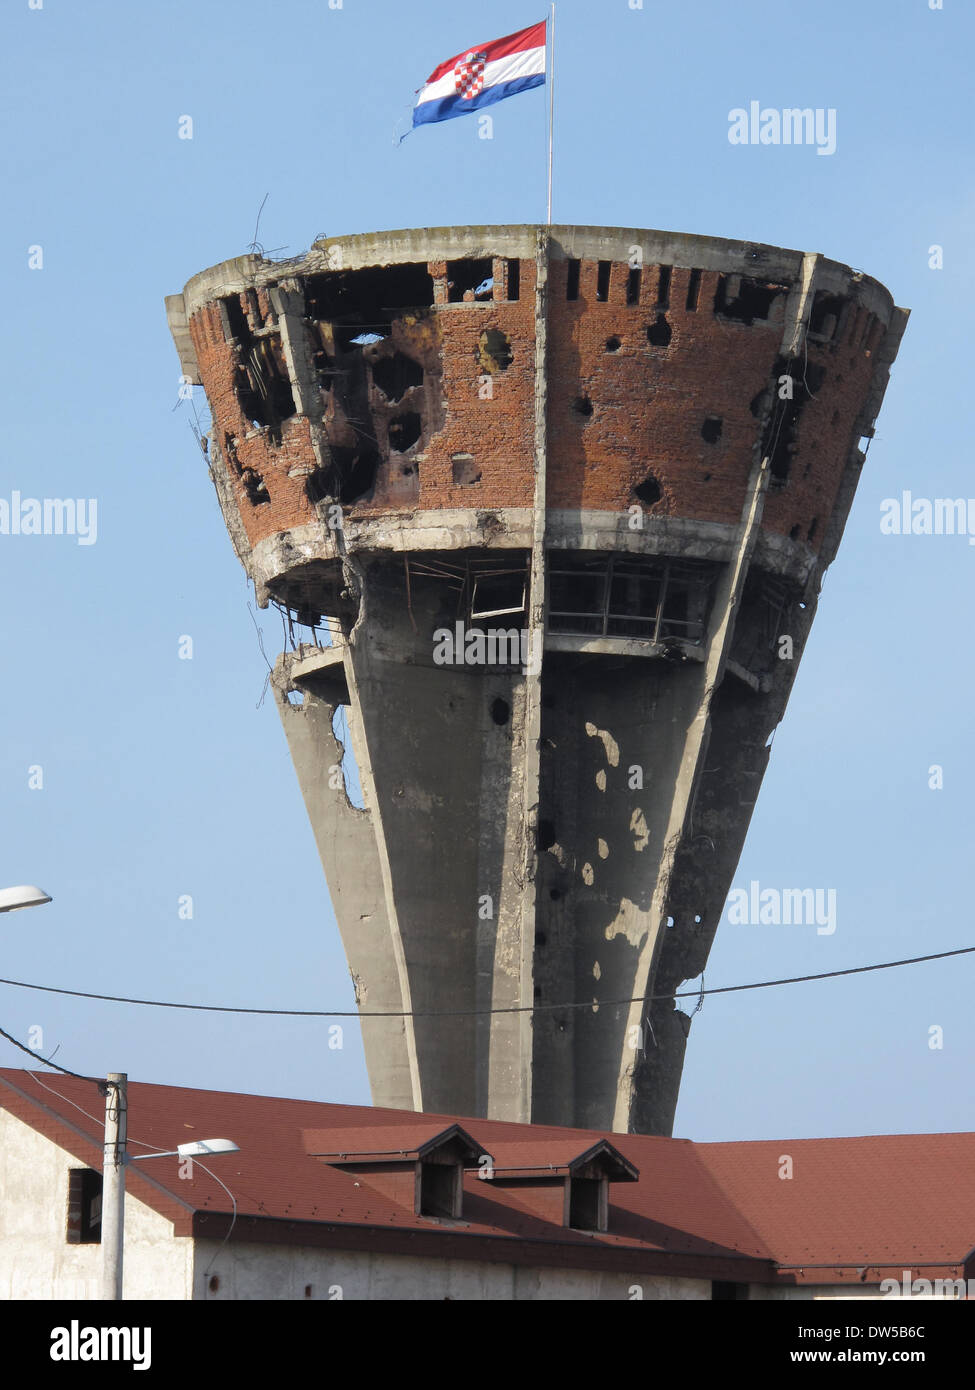 Vukovar, Croatia. 25th Feb, 2014. The water tower, destroyed in the war and preserved as a monument, in Vukovar, Croatia, 25 February 2014. 22 years ago, the city received international attention as the 'Croatian Stalingrad' as the conflict between the Croatian majority and Serbian minority flared up. Photo: Thomas Brey/dpa/Alamy Live News Stock Photo